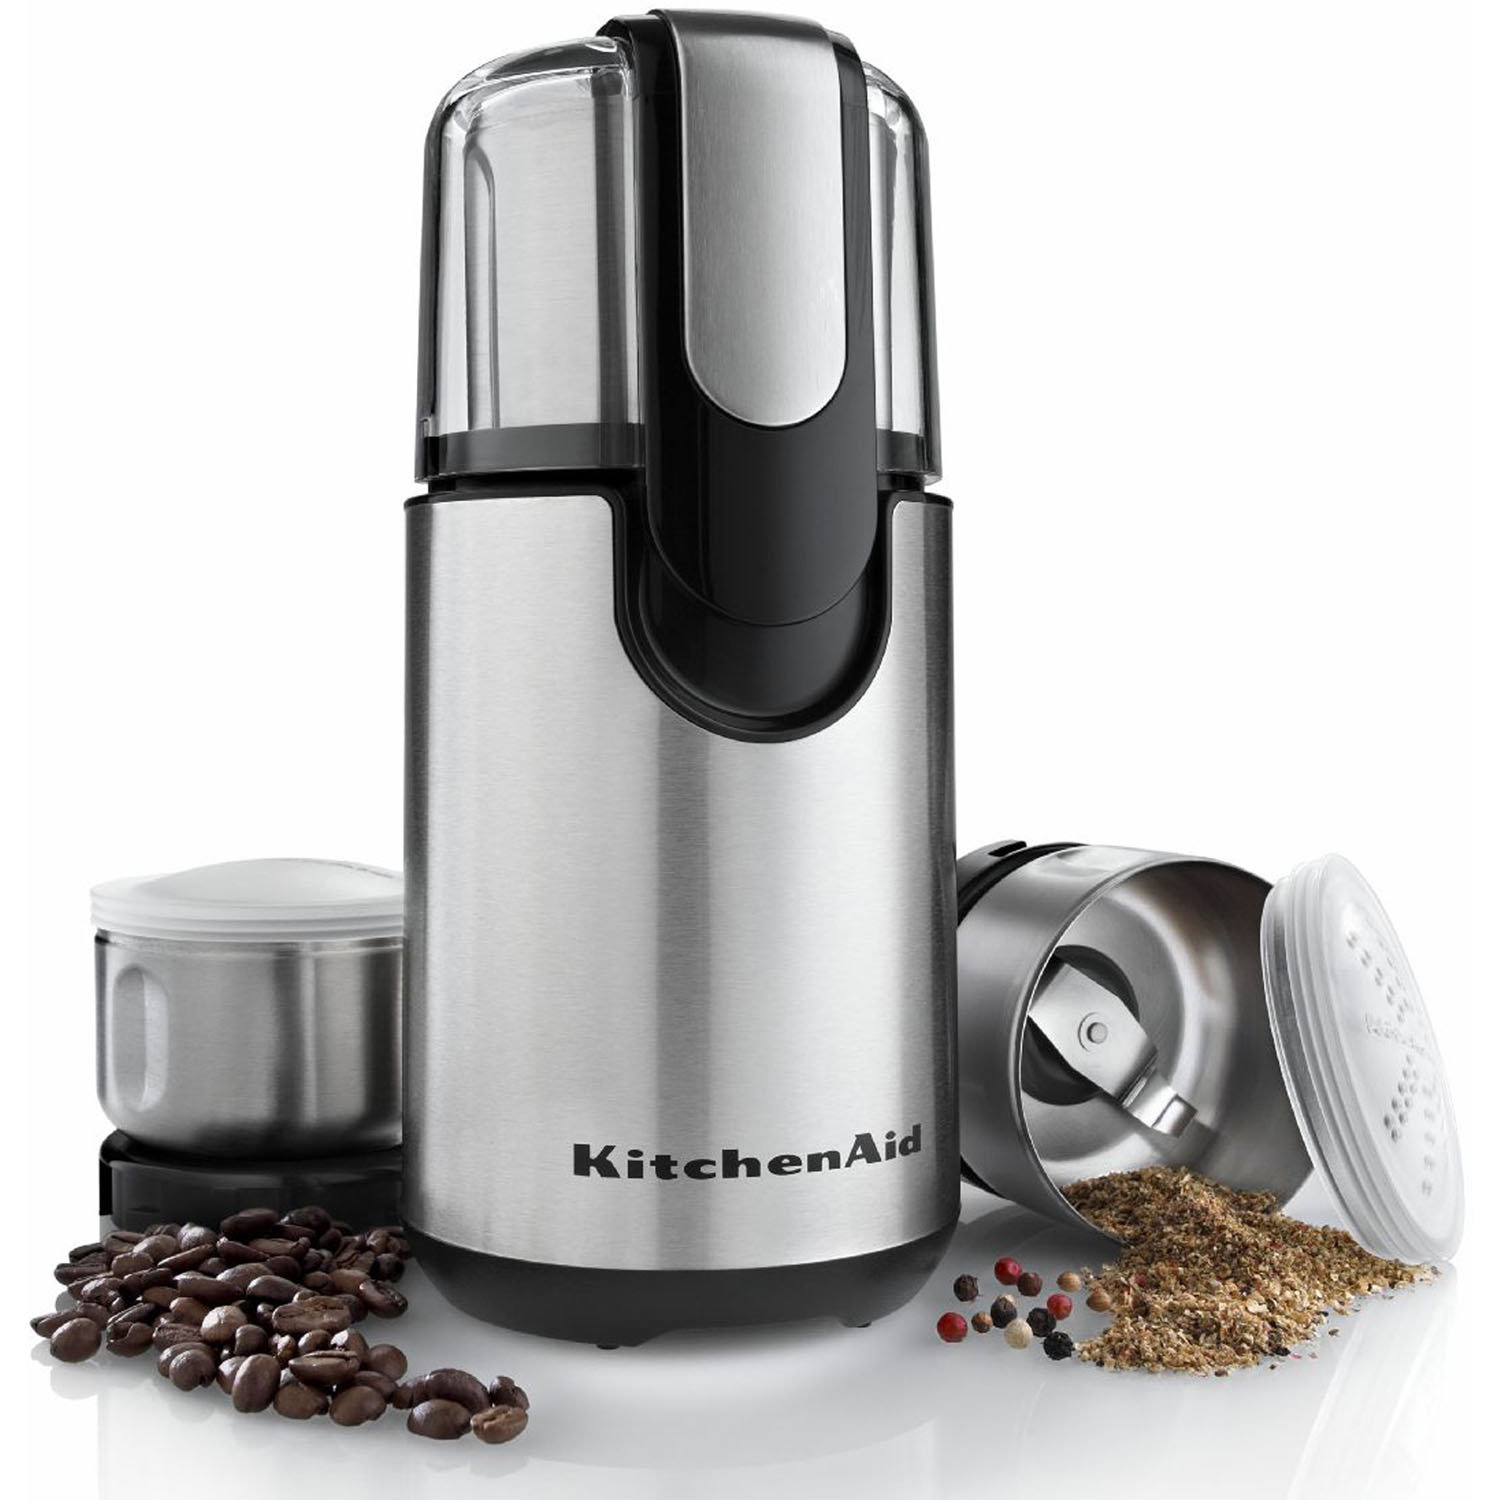 Krups Coffee And Spice Grinder 12 Cup Easy To Use, One Touch